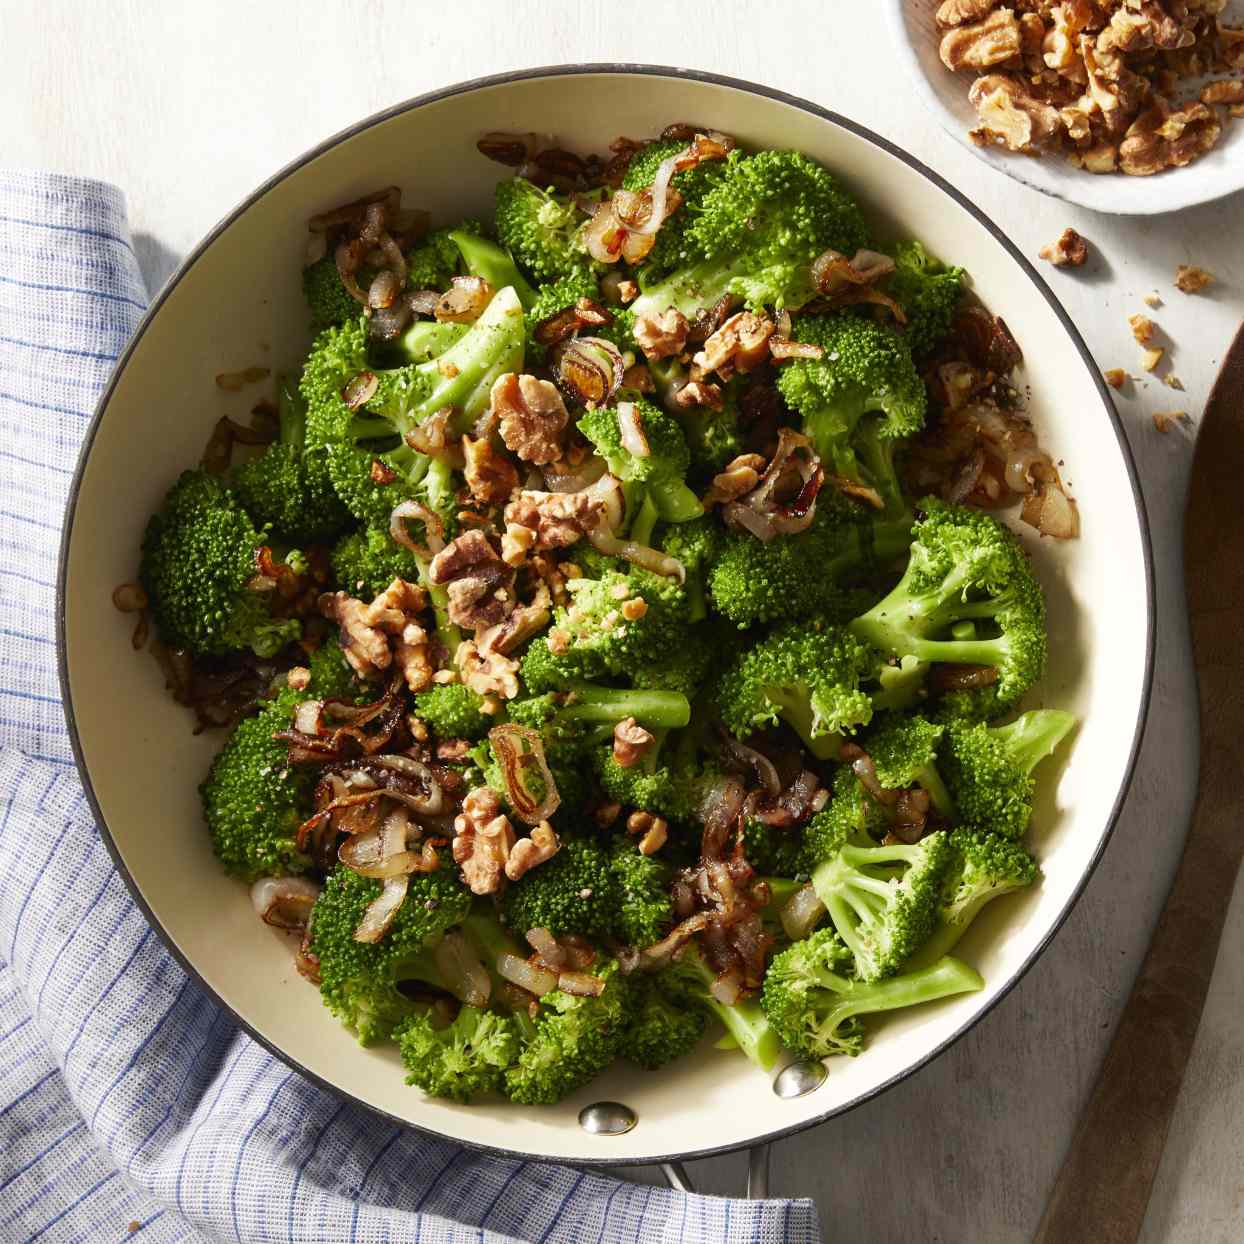 Broccoli with Caramelized Shallots